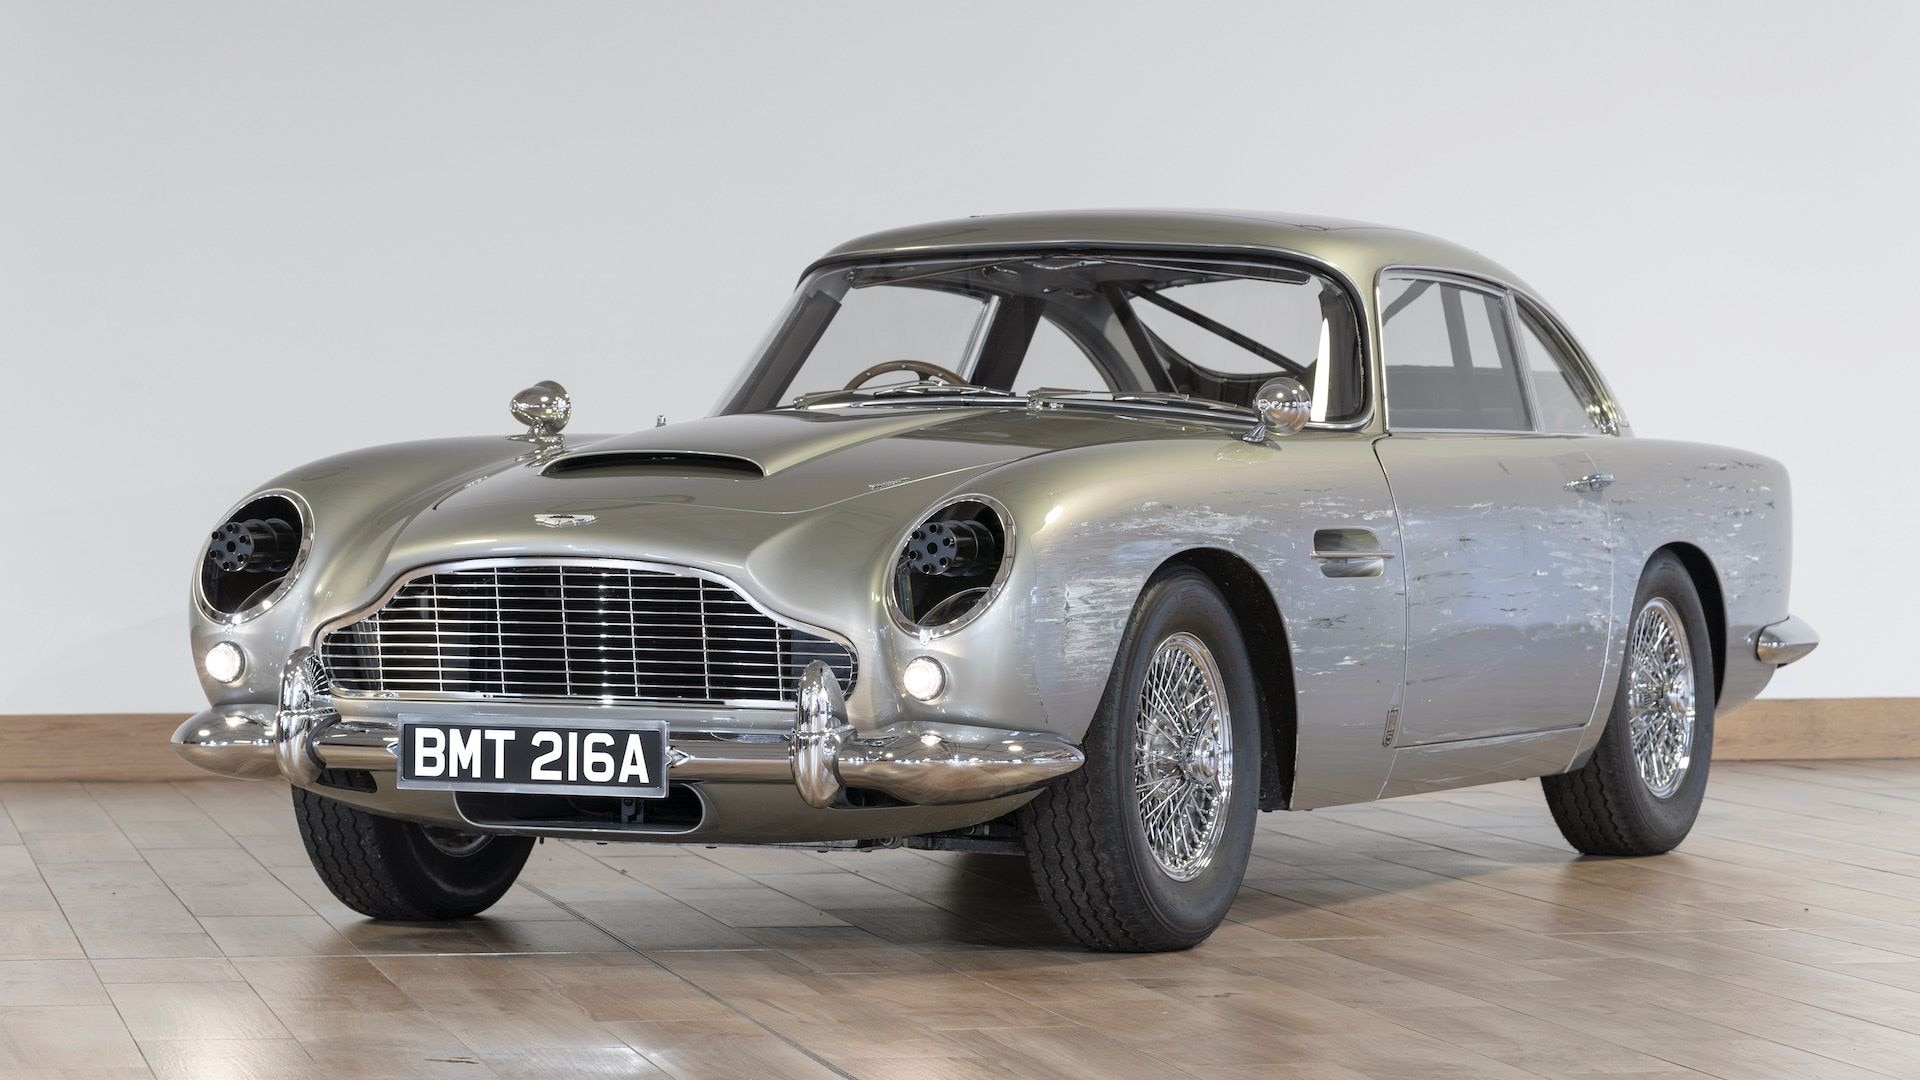 Aston Martin DB5 stunt car from "No Time To Die"